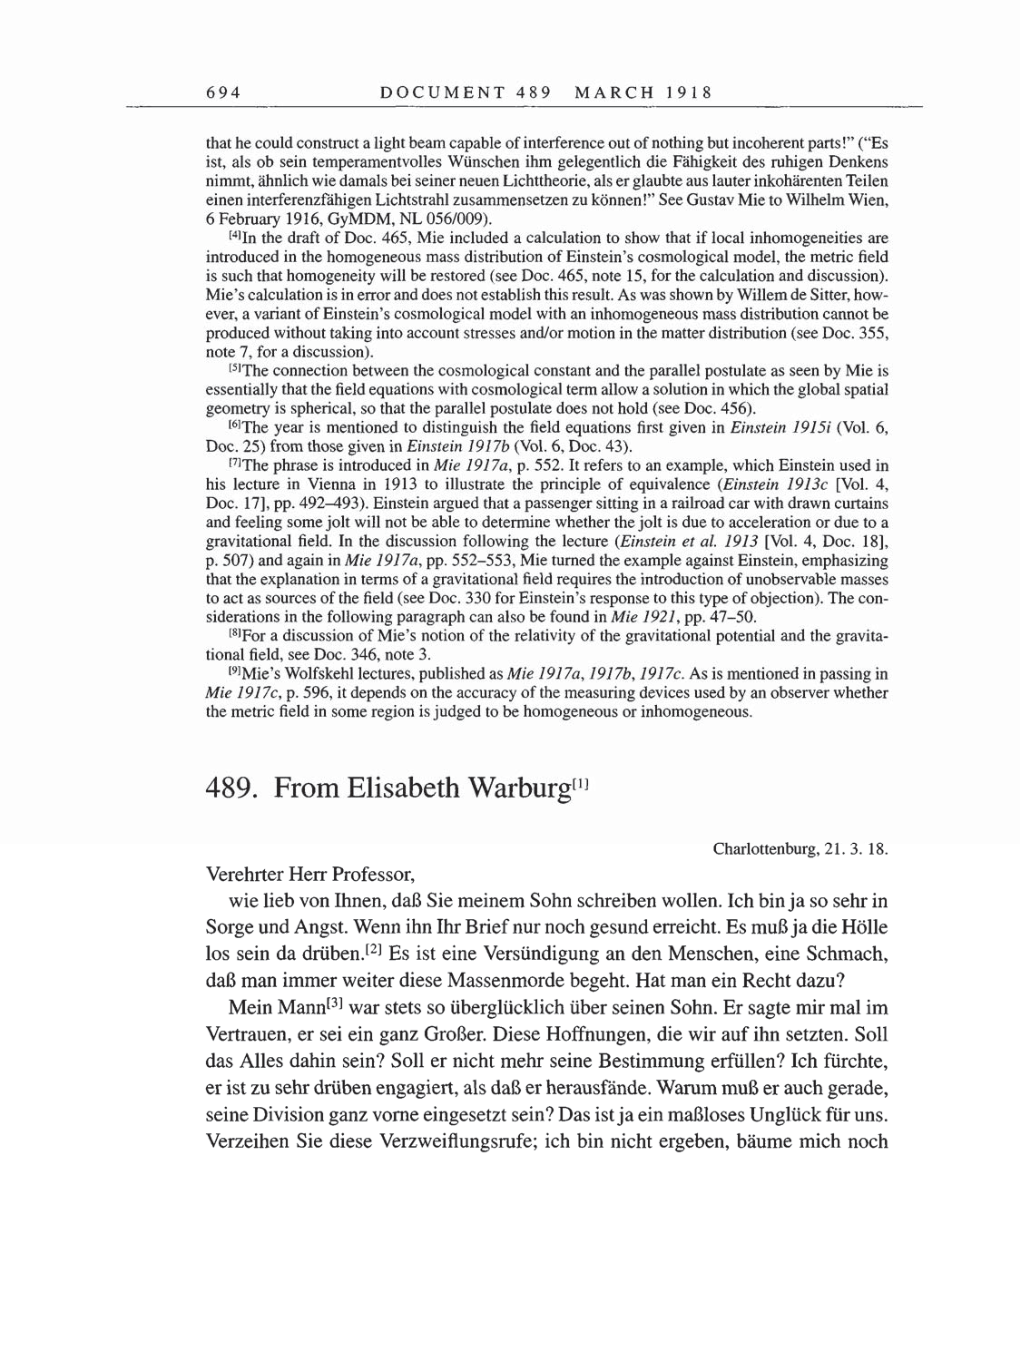 Volume 8, Part B: The Berlin Years: Correspondence 1918 page 694